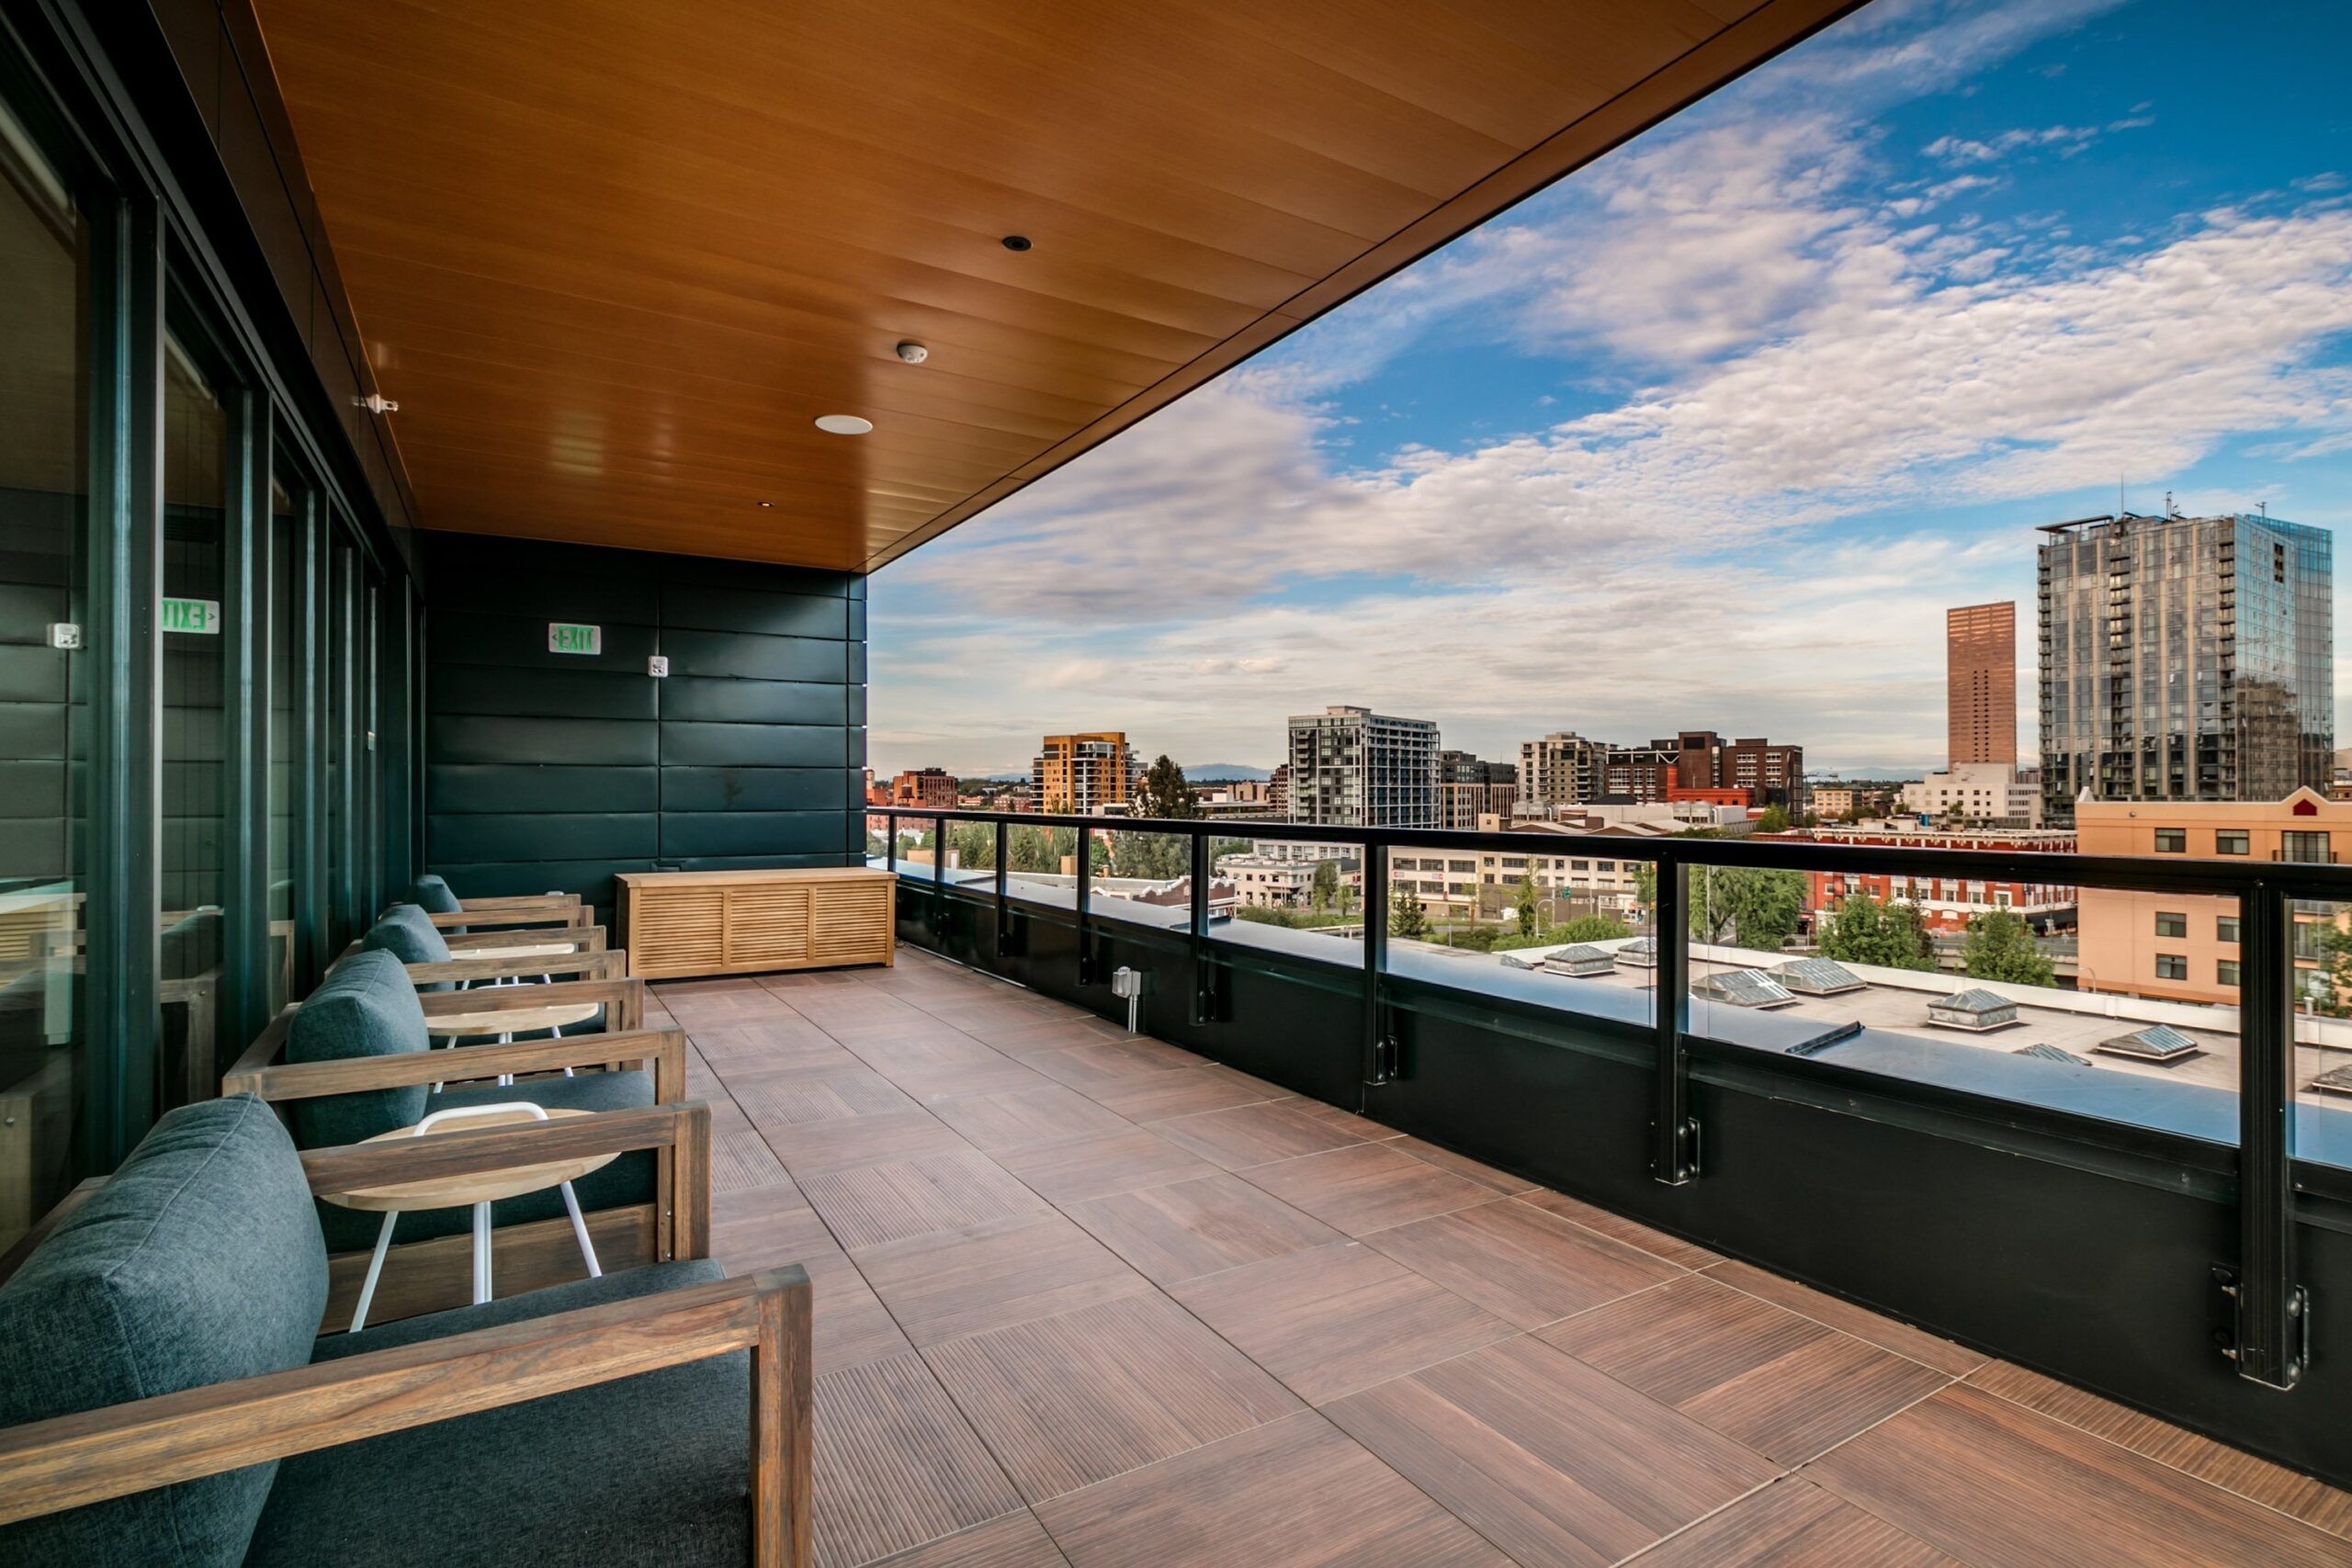 Alta Peak apartments outdoor amenity space with seating and skyline views